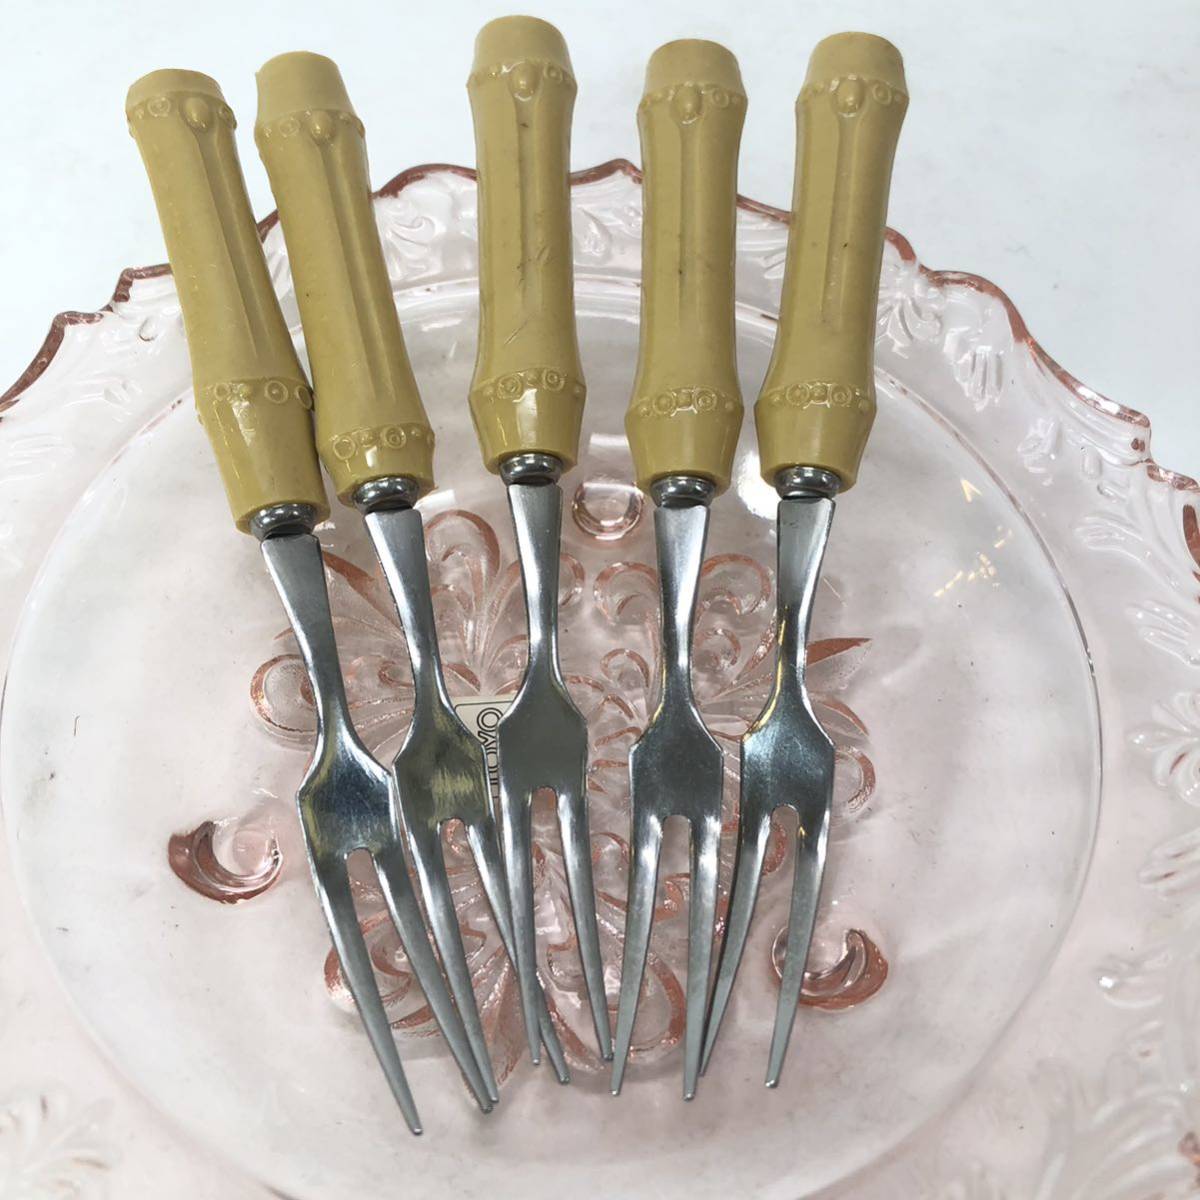 TOYOGLASSWARE glass tableware 5 customer set small plate desert Fork attaching rose pin Claw n deep plate set made in Japan Showa Retro unused box attaching 